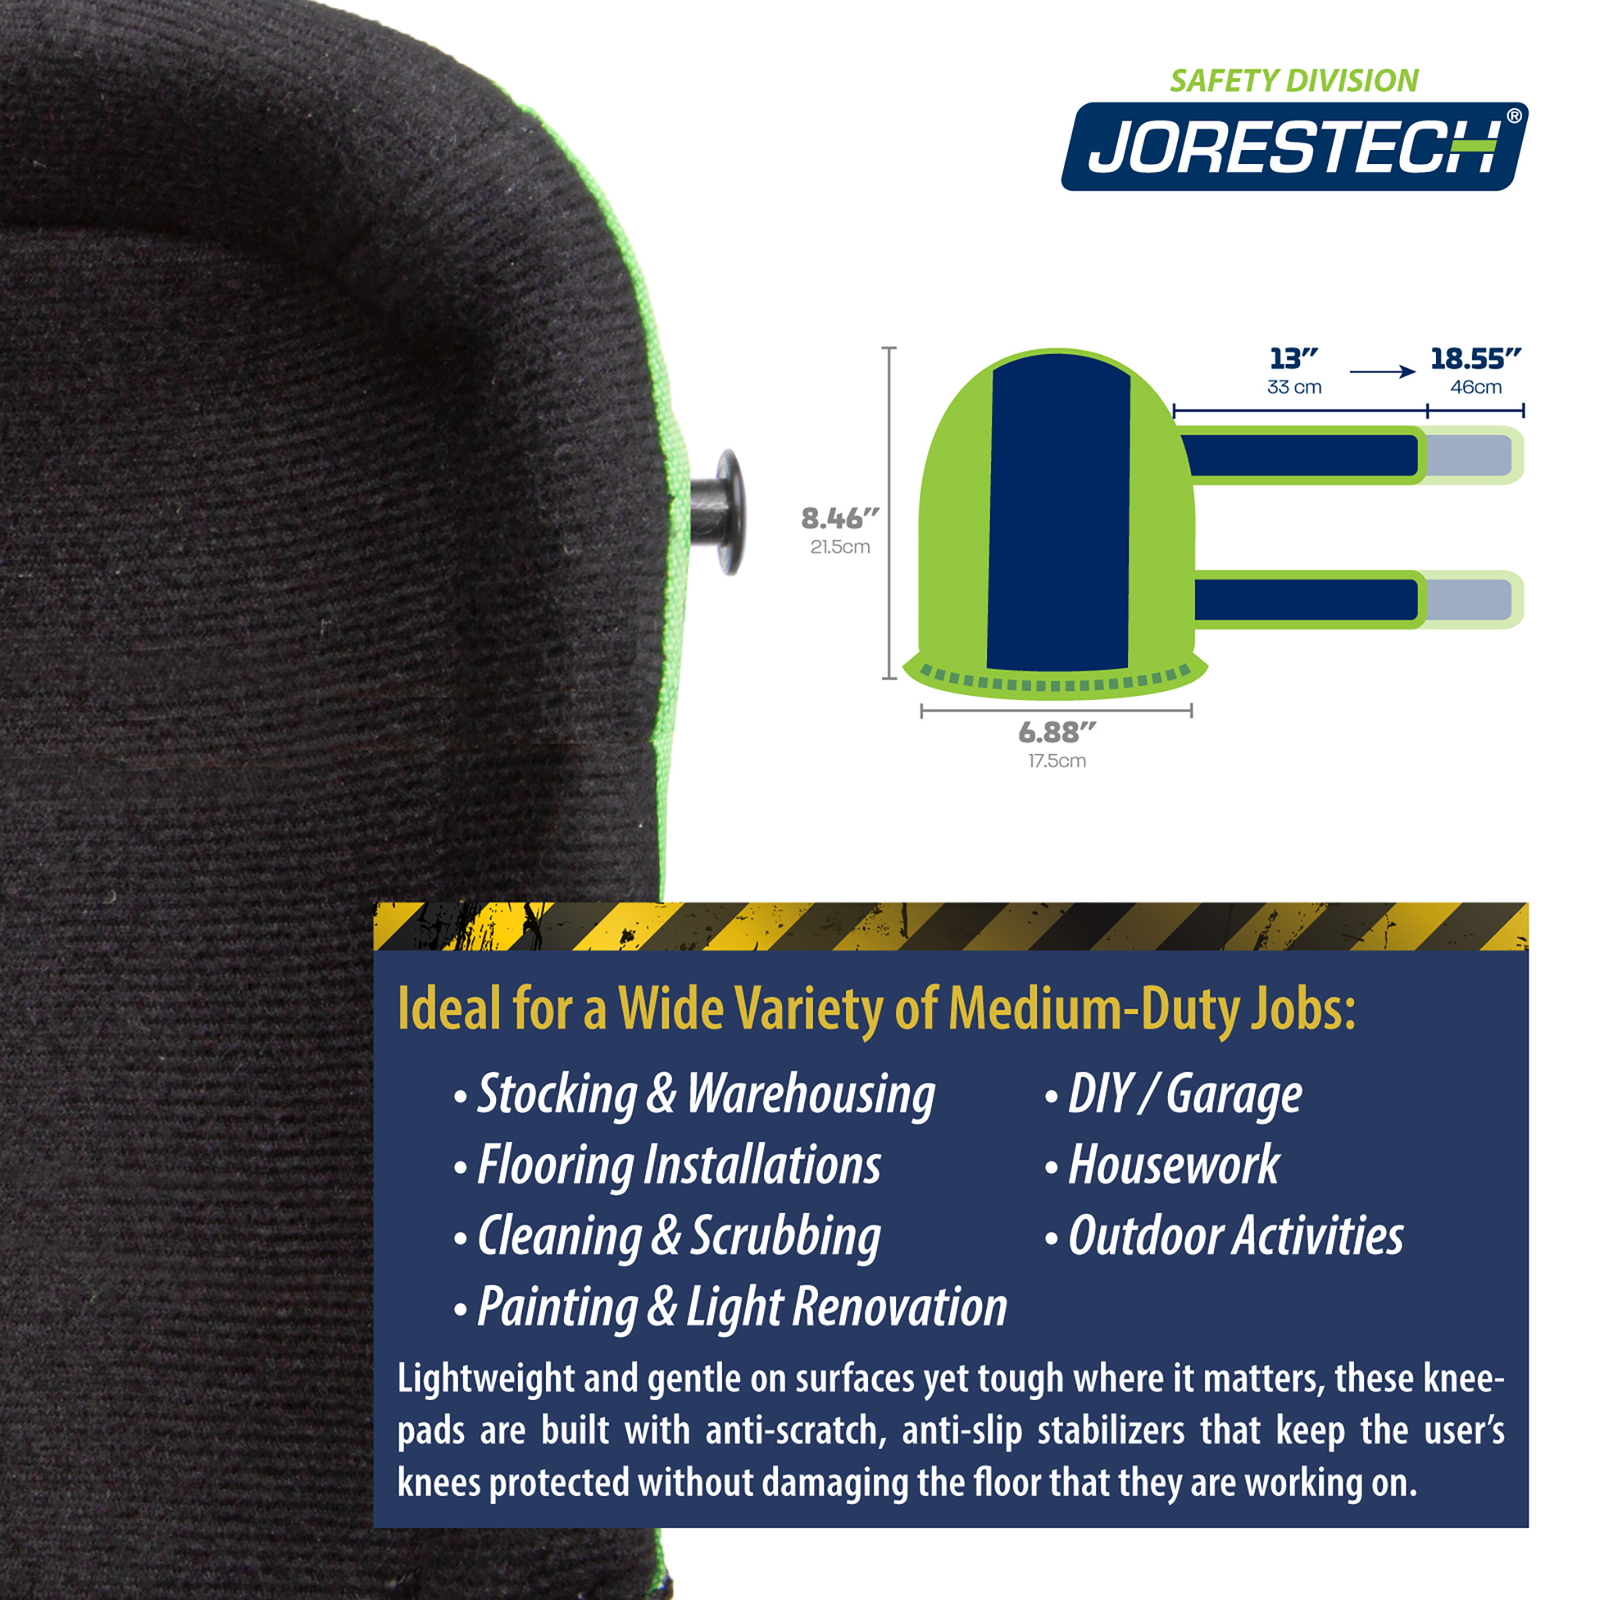 Infographic shows the measurements of the knee pads and text that reads: Ideal for a wide variety of medium-duty jobs: stocking & warehousing, floor installations, cleaning & scrubbing, painting & lighting, DIY/garage, housework, outdoor activities. Lightweight and gentle on surfaces yet tough where it matters, these kneepads are built with anti-scratch, anti-slip stabilizers that keep the user’s knees protected without damaging the floor they are working on.